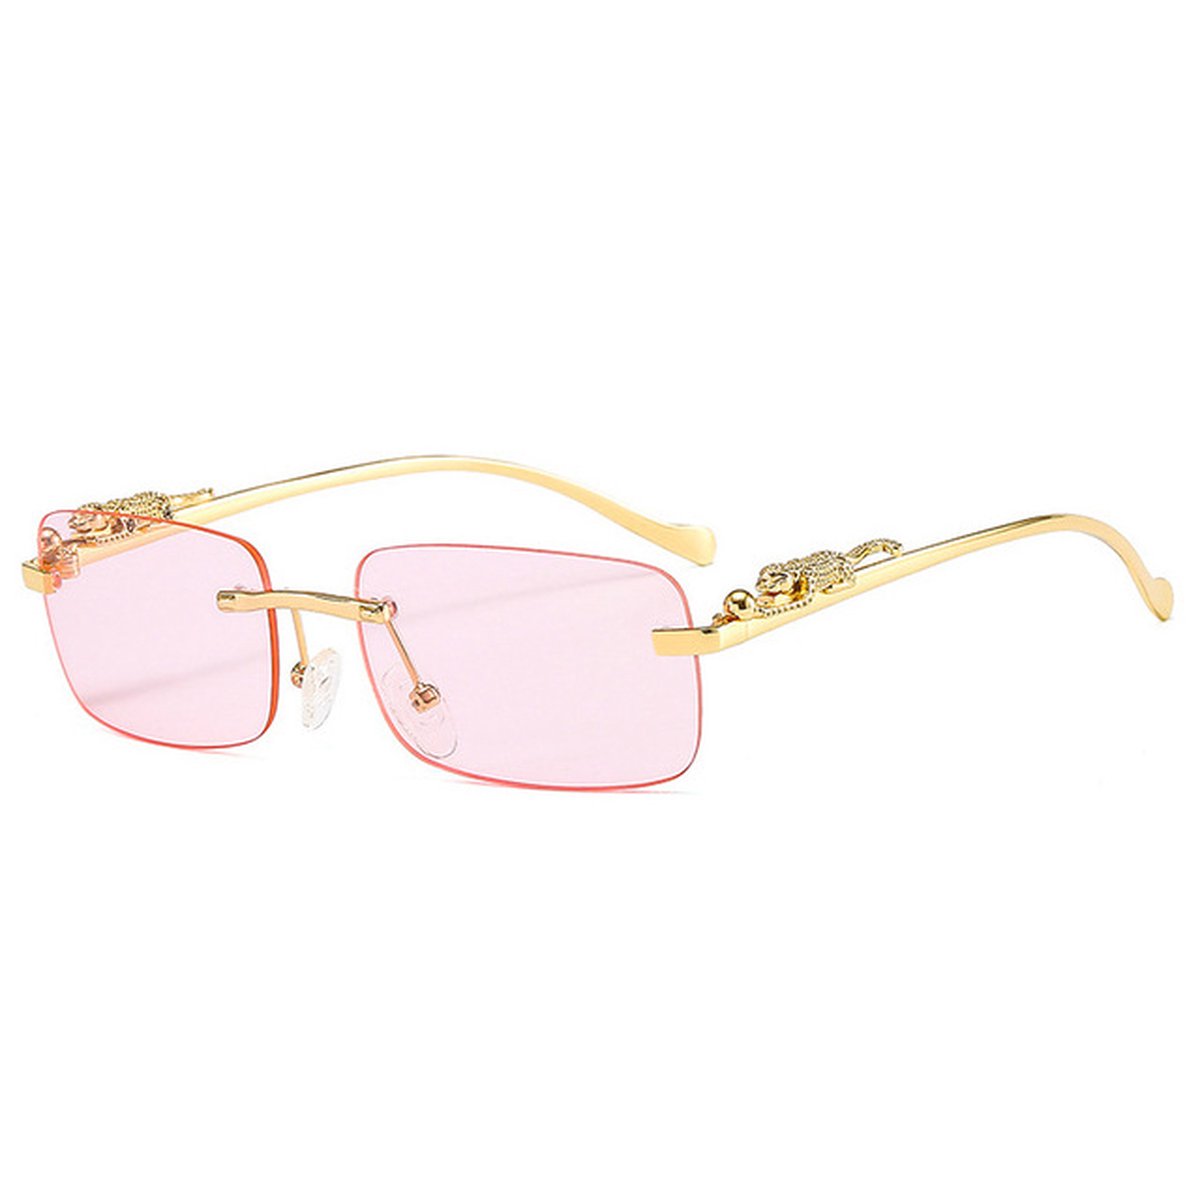 LOUD AND CLEAR® - Heren Zonnebril - Dames Zonnebril - Goud - Roze - Luipaard Bril - Luxe